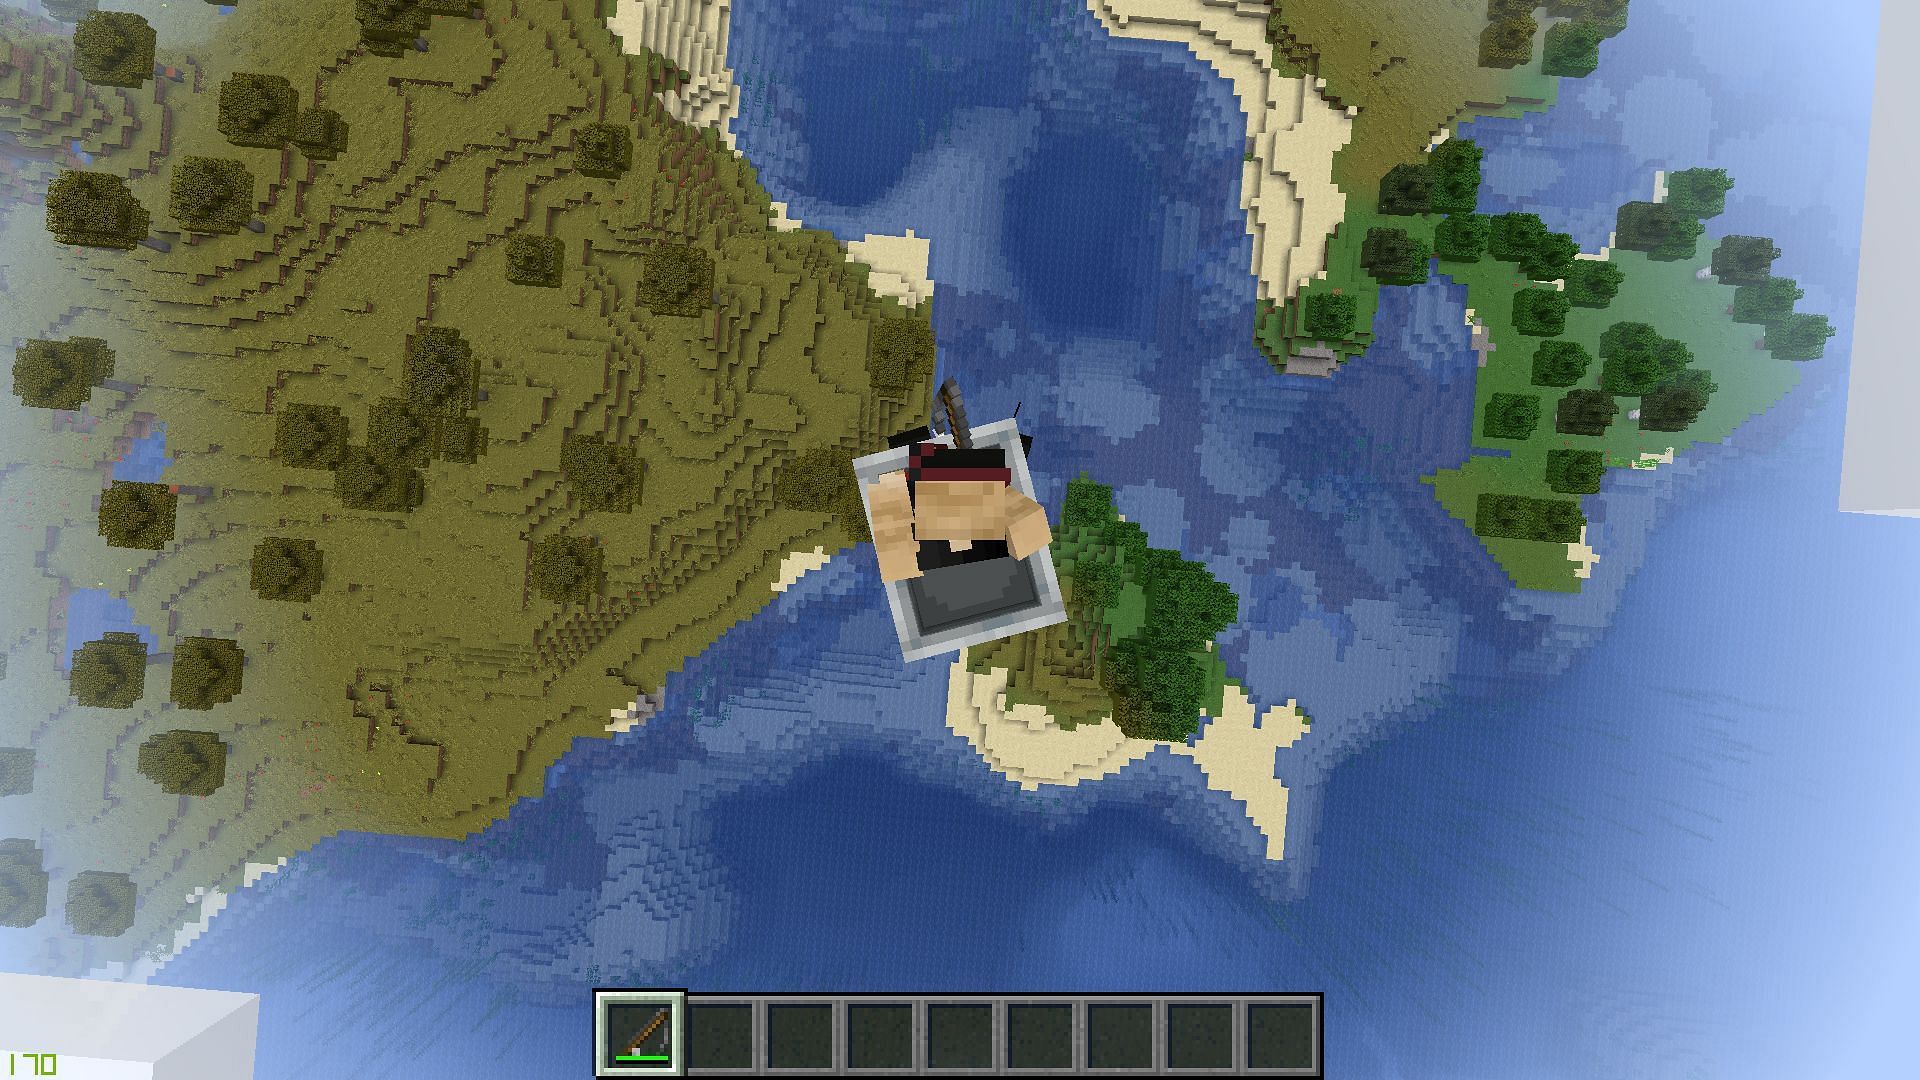 In previous iterations, players could fly while seated with a fishing rod (Image via Mojang)